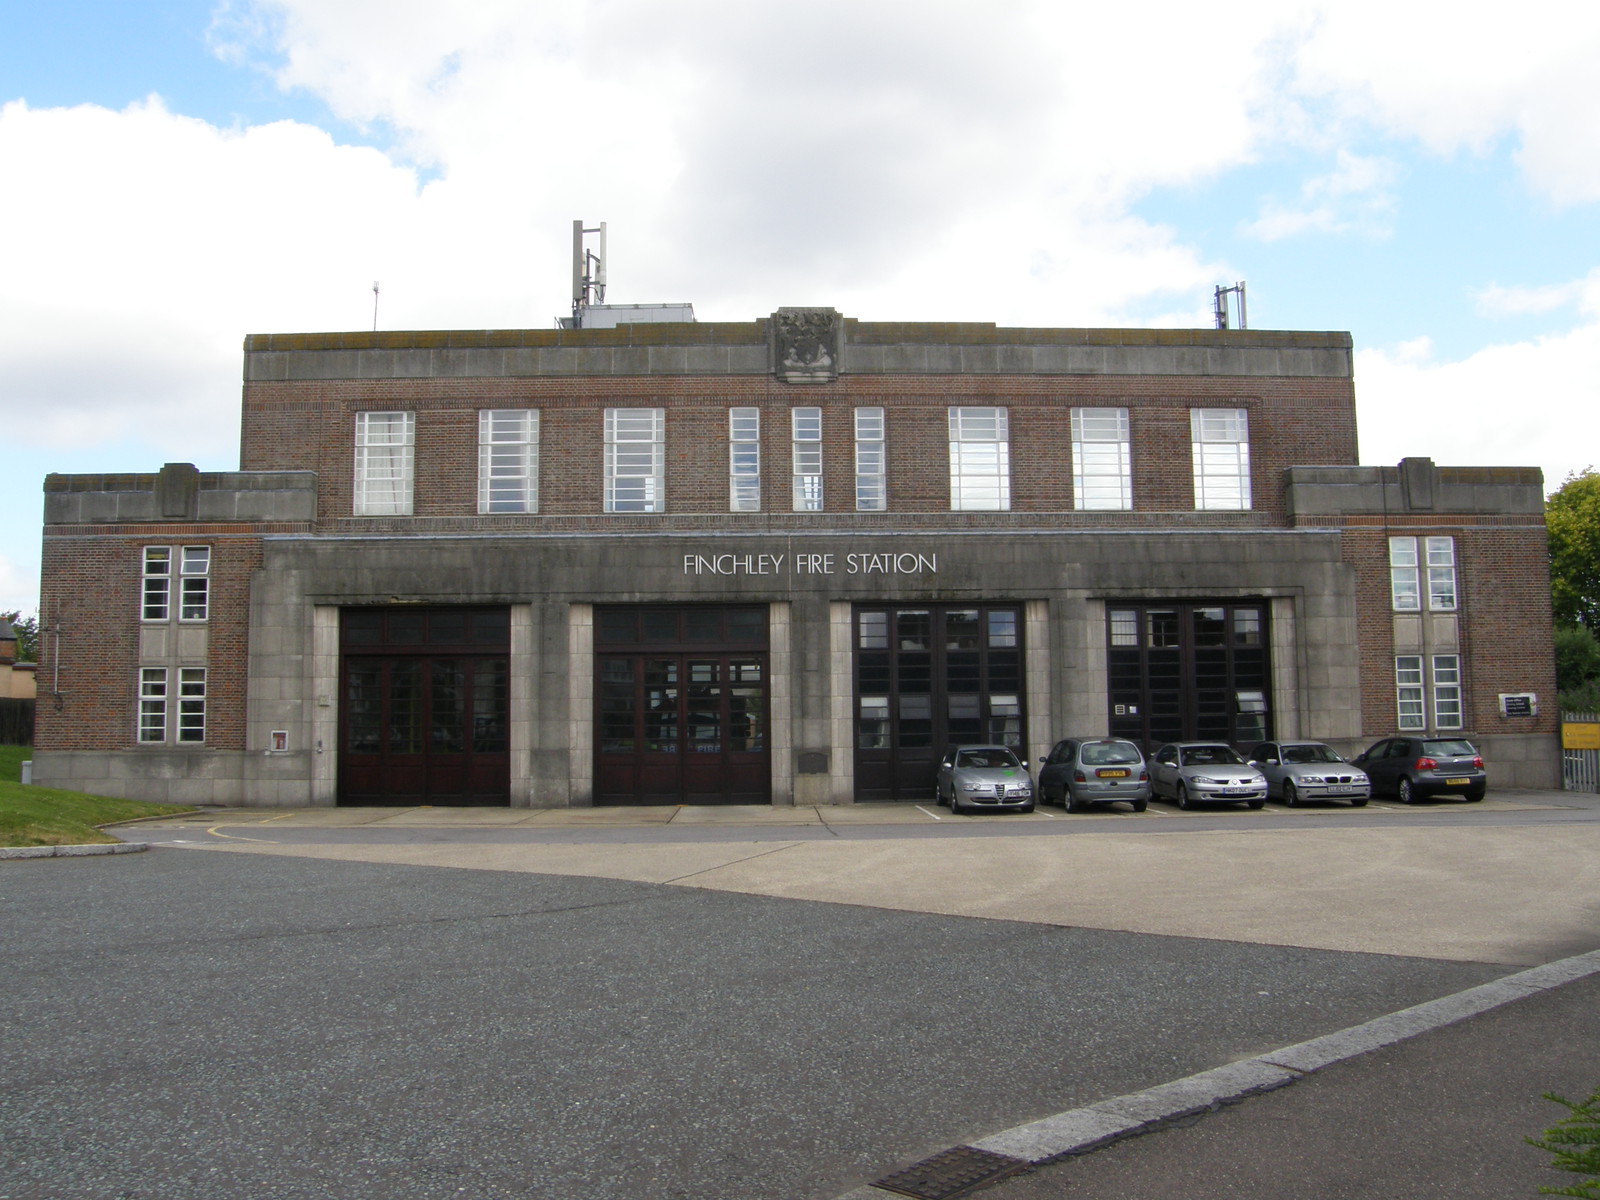 Finchley Fire Station